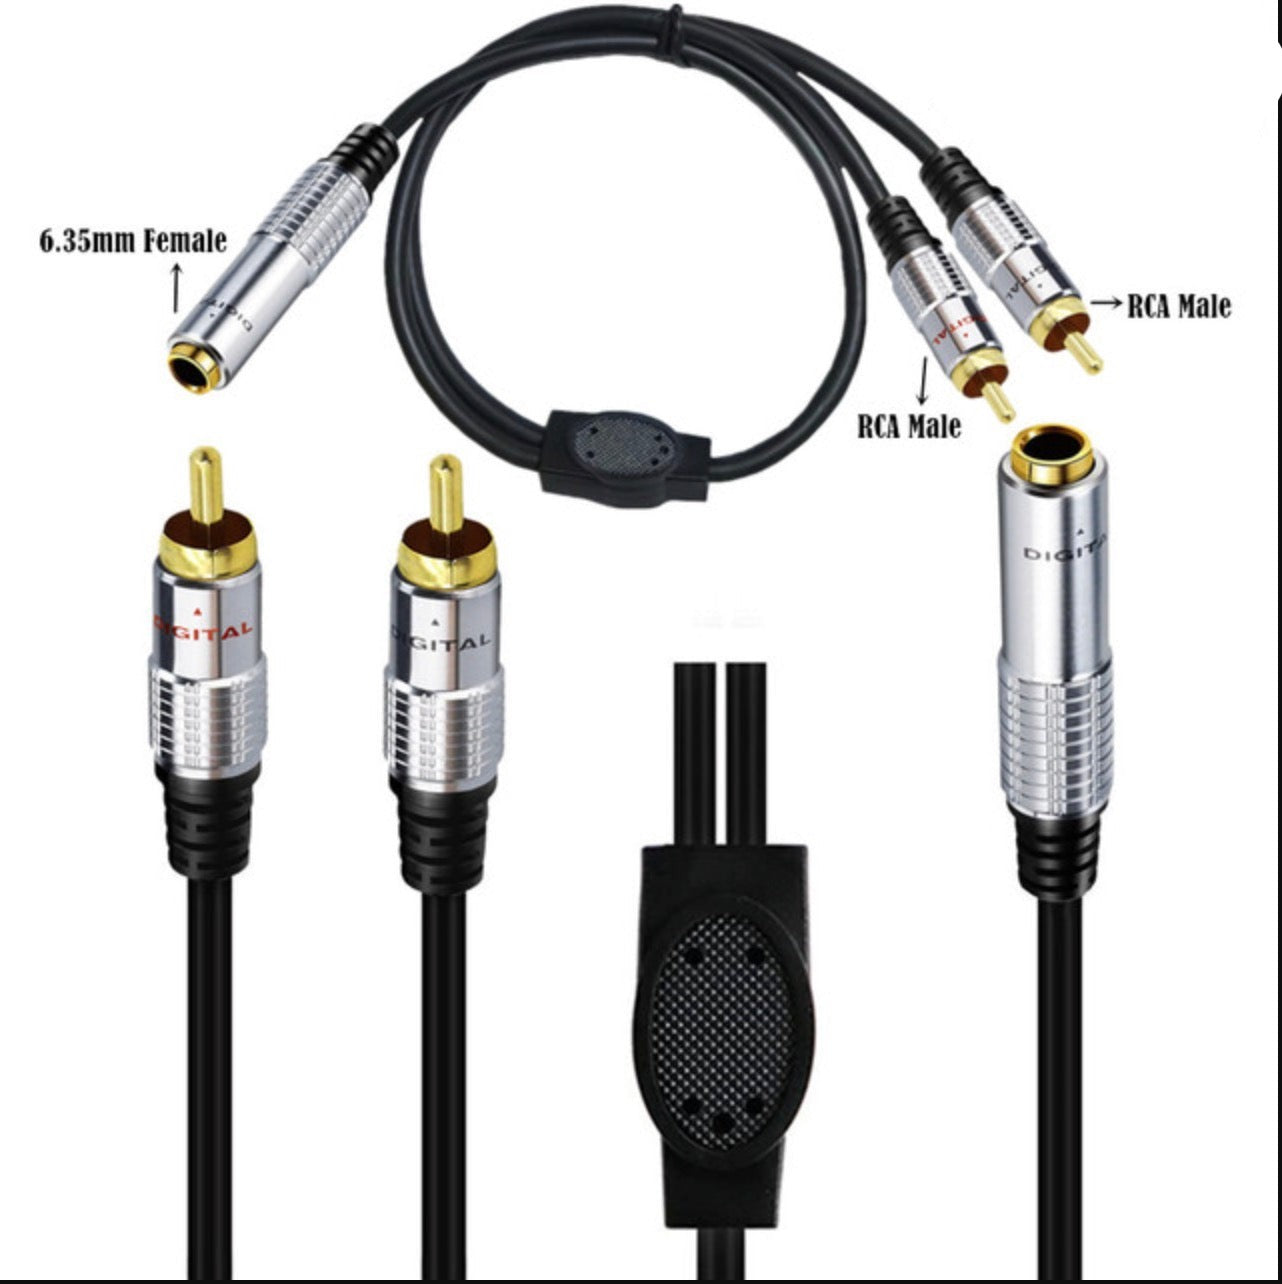 6.35mm 1/4 inch Female to 2 x RCA Male Splitter Audio Stereo Cable 0.5m